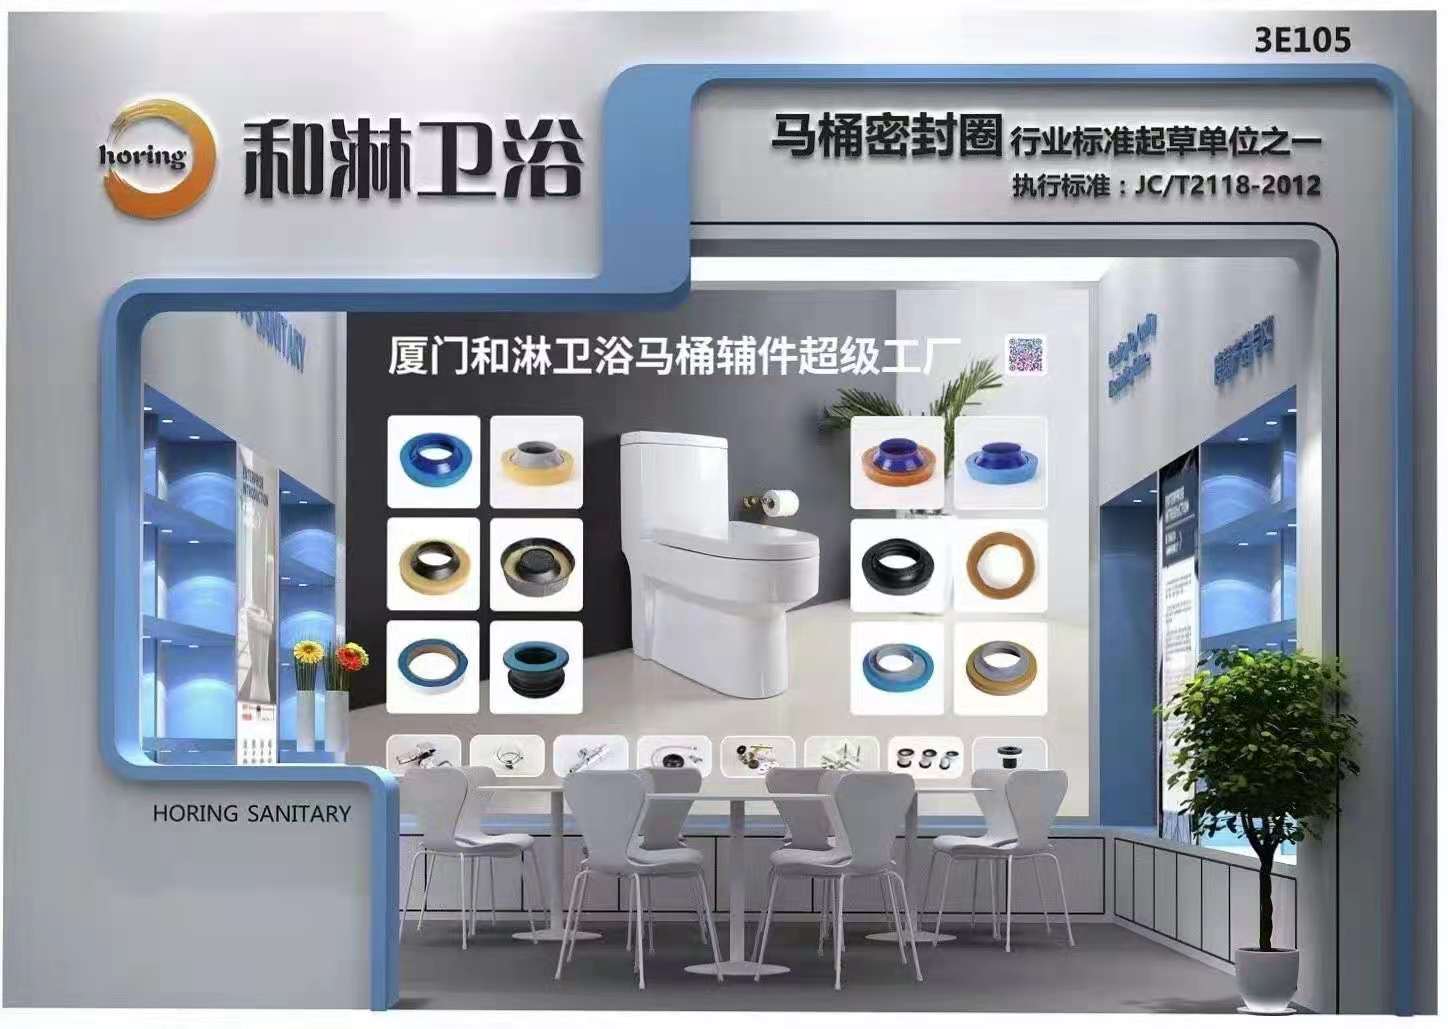 Invitation of China 26th  Kitchen & Bath Trading Fair from Horing